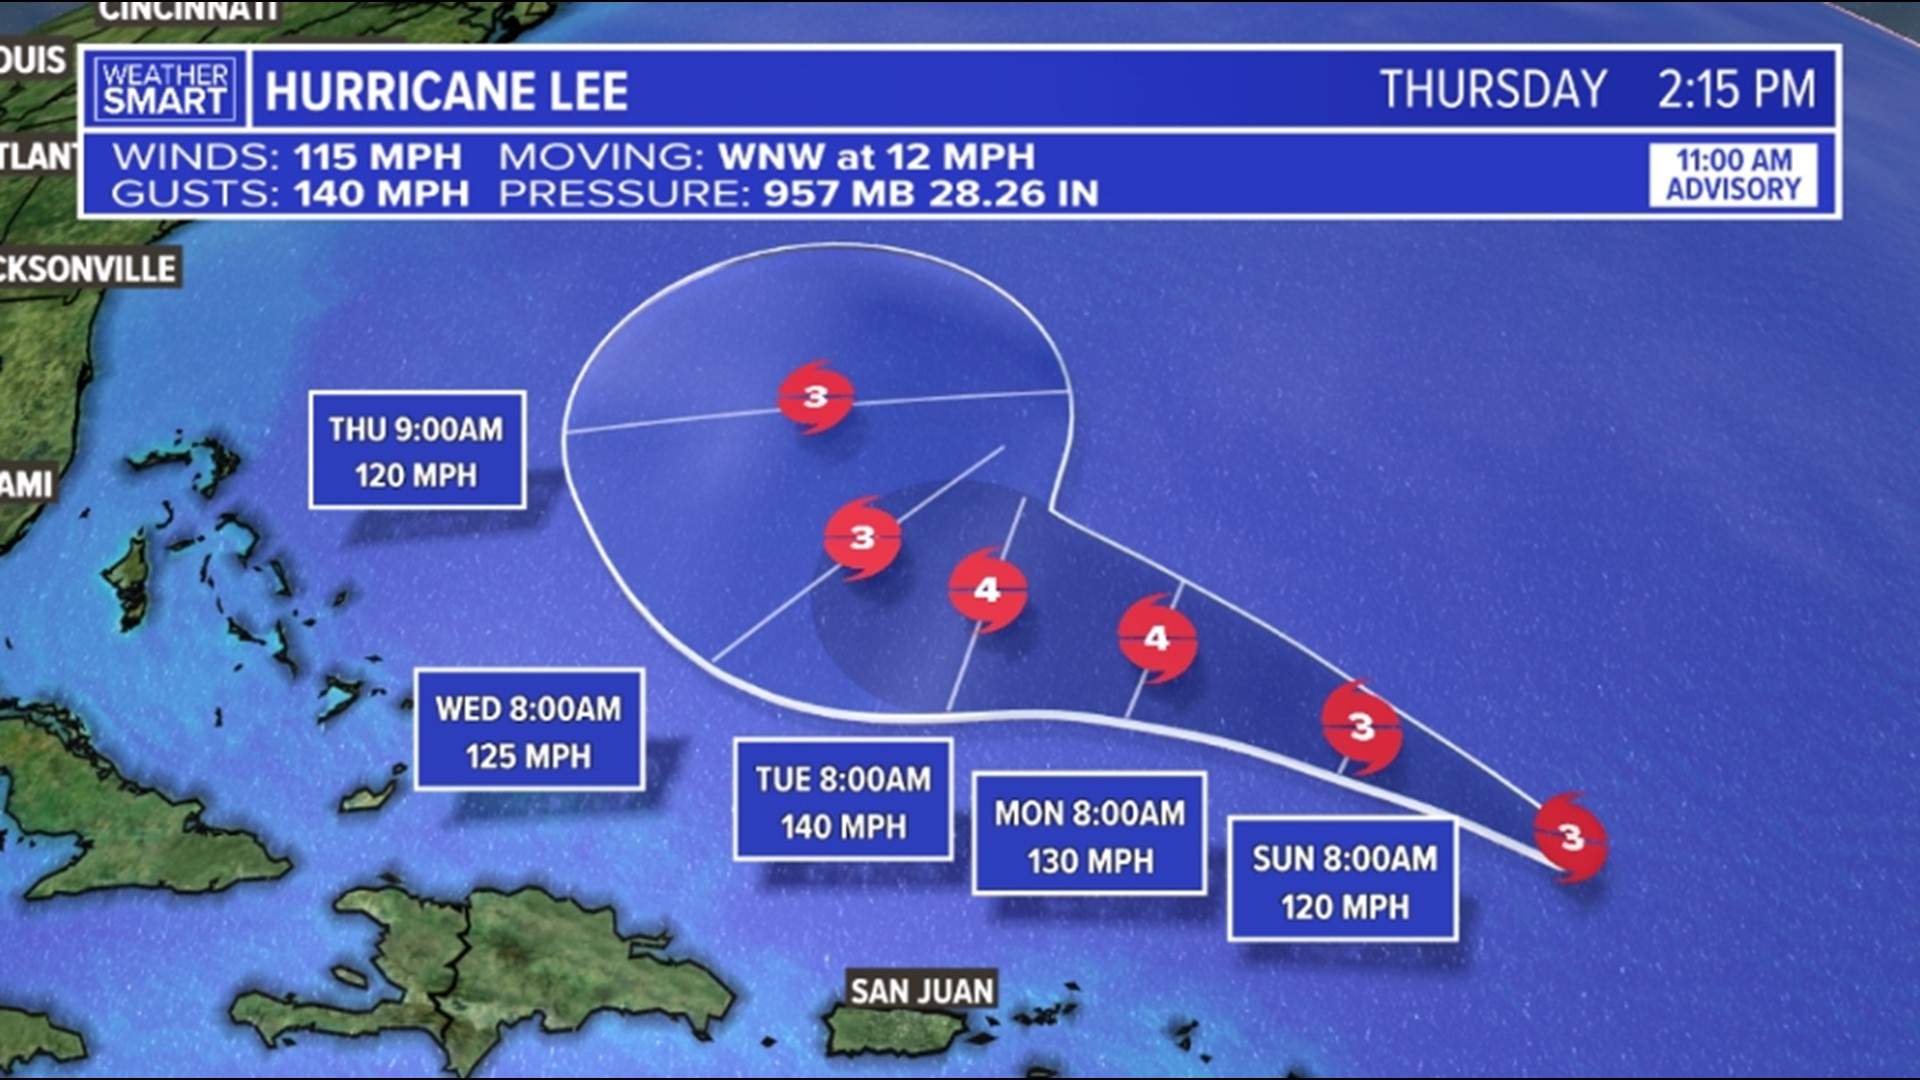 Hurricane Lee continues to move northwest as a major hurricane. This storm is expected to turn north next week. Meanwhile, Margot could strengthen over the Atlantic.